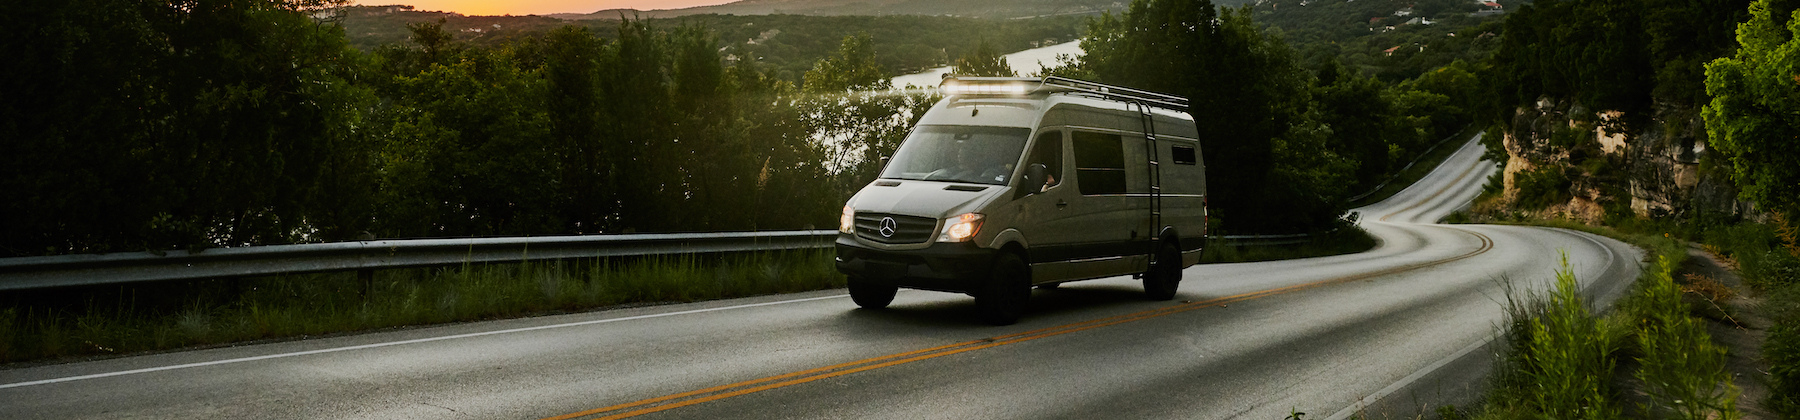 Finding the best van insurance to rent out your rig